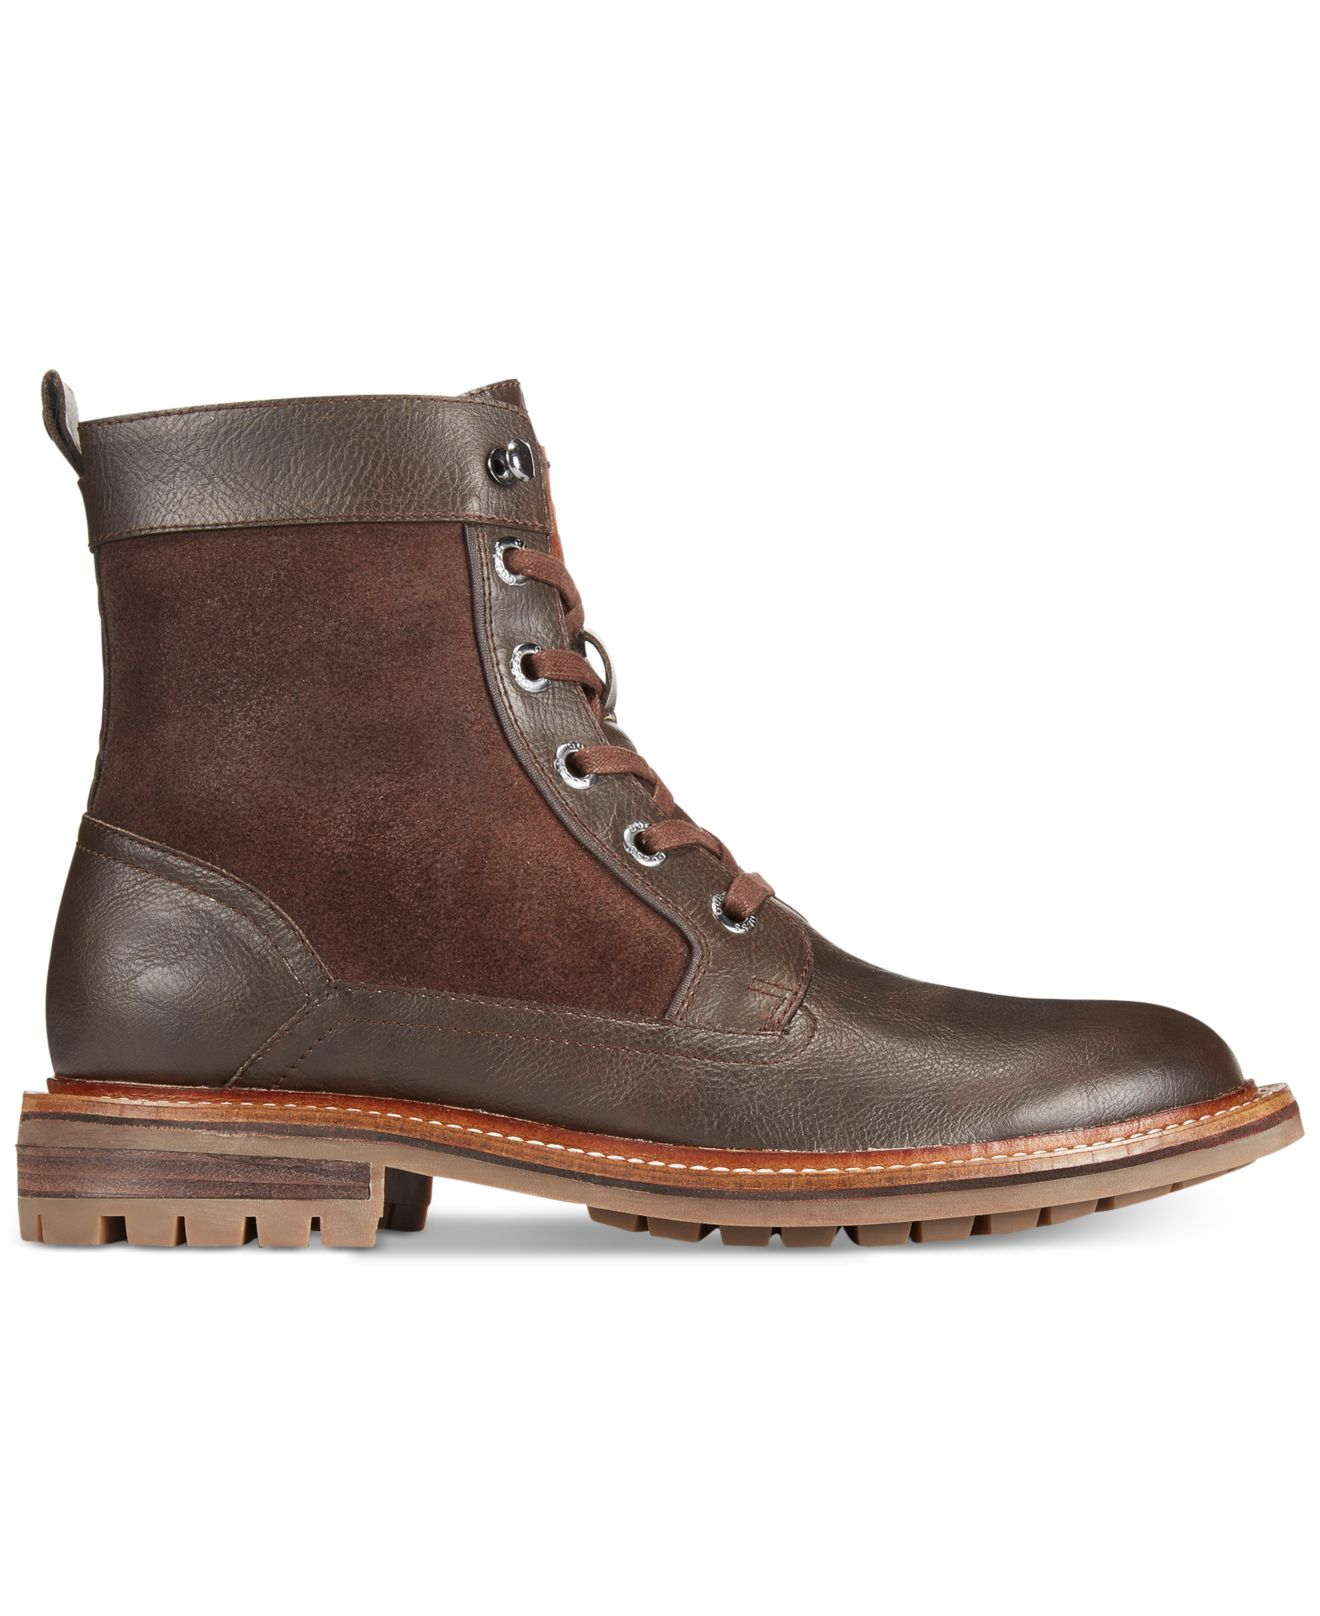 Lyst - Guess Reid Boots in Brown for Men